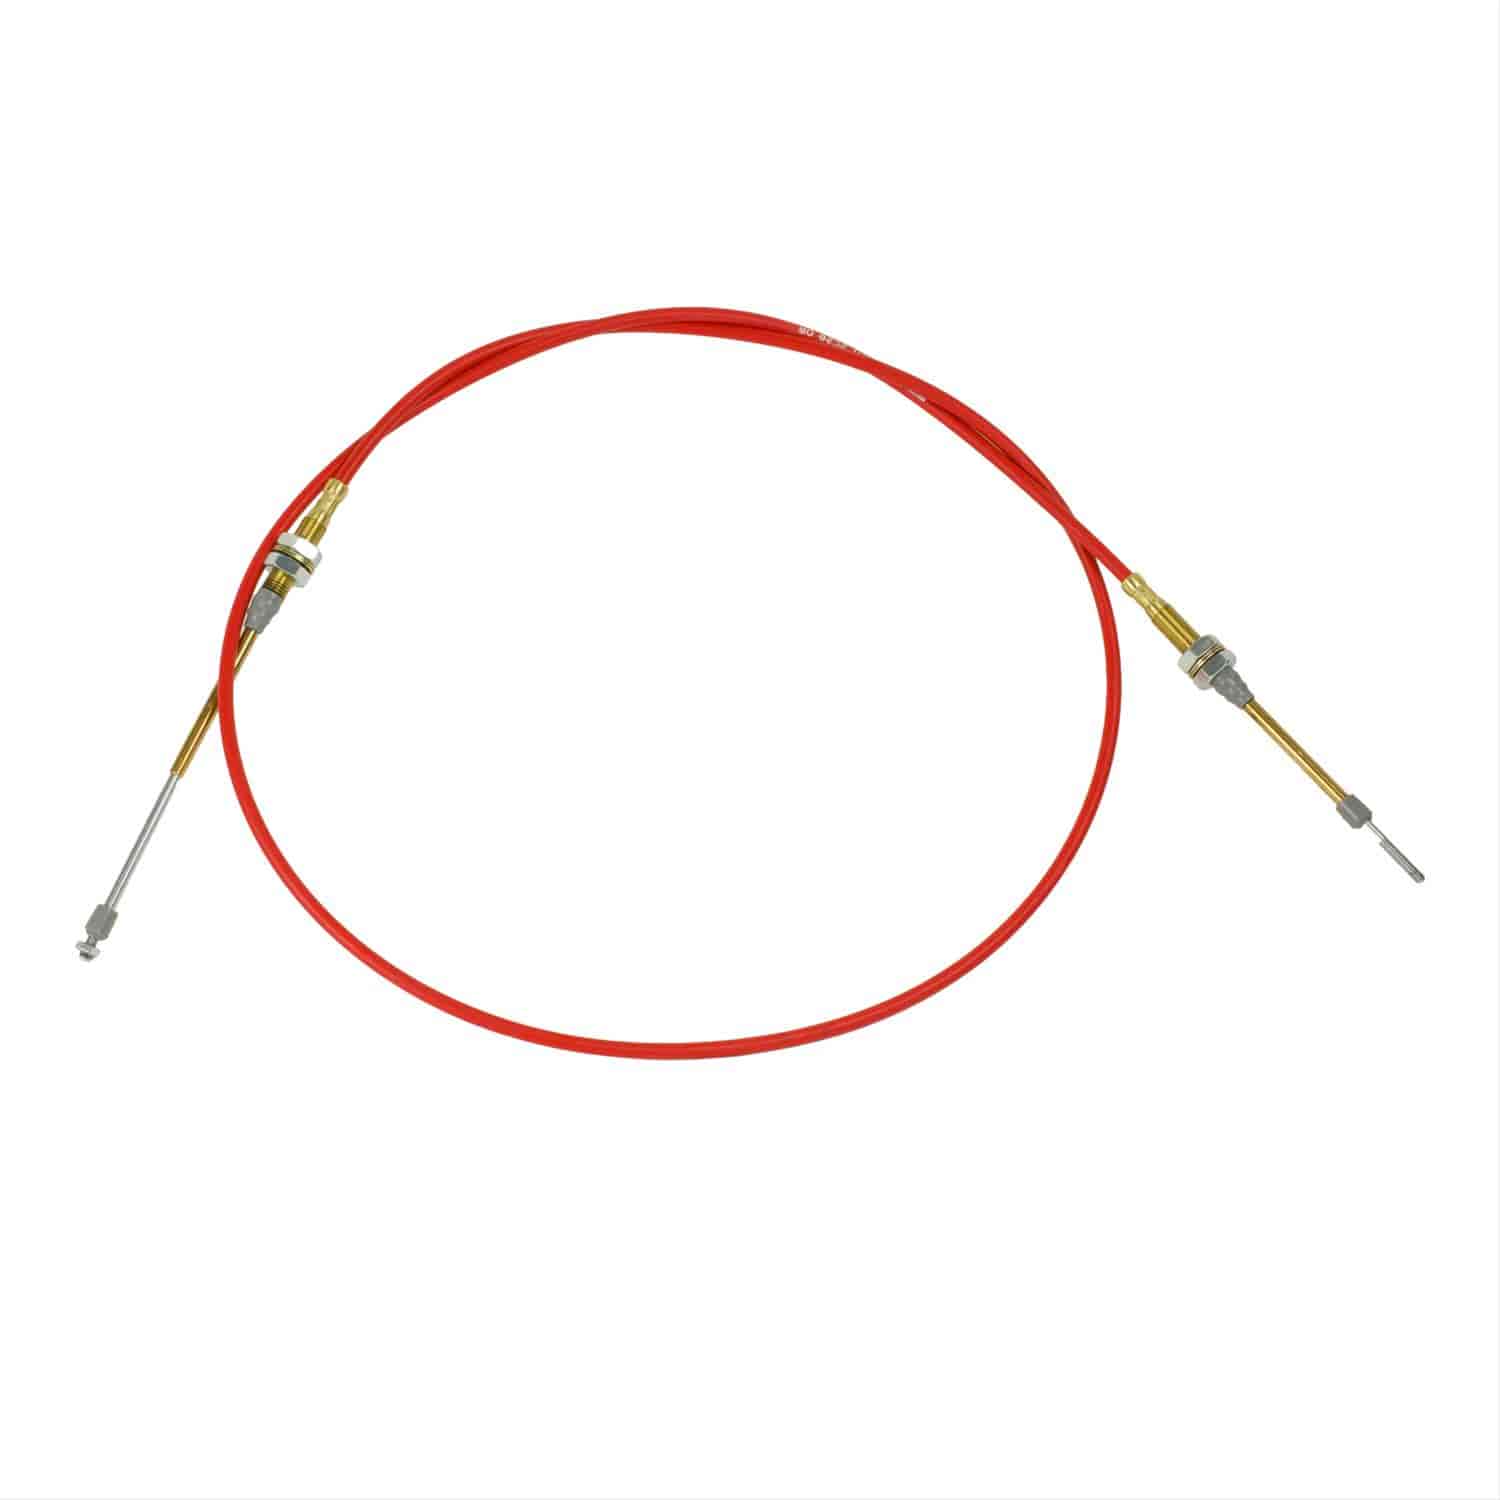 Automatic Performance Shifter Cable 6-Foot Length